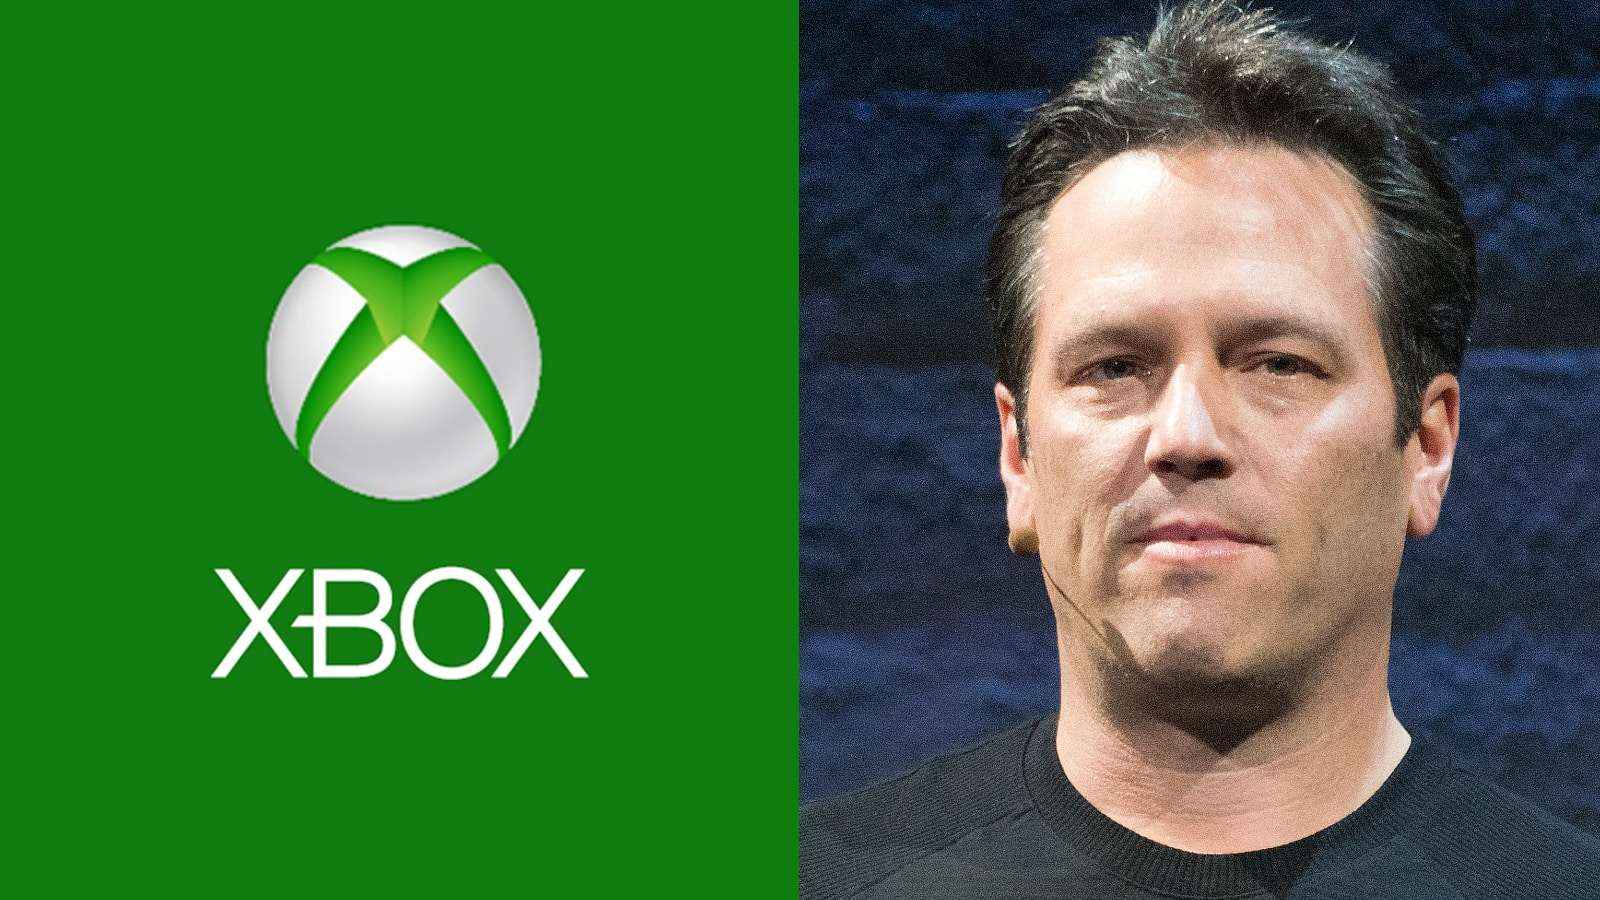 Xbox and Phil Spencer